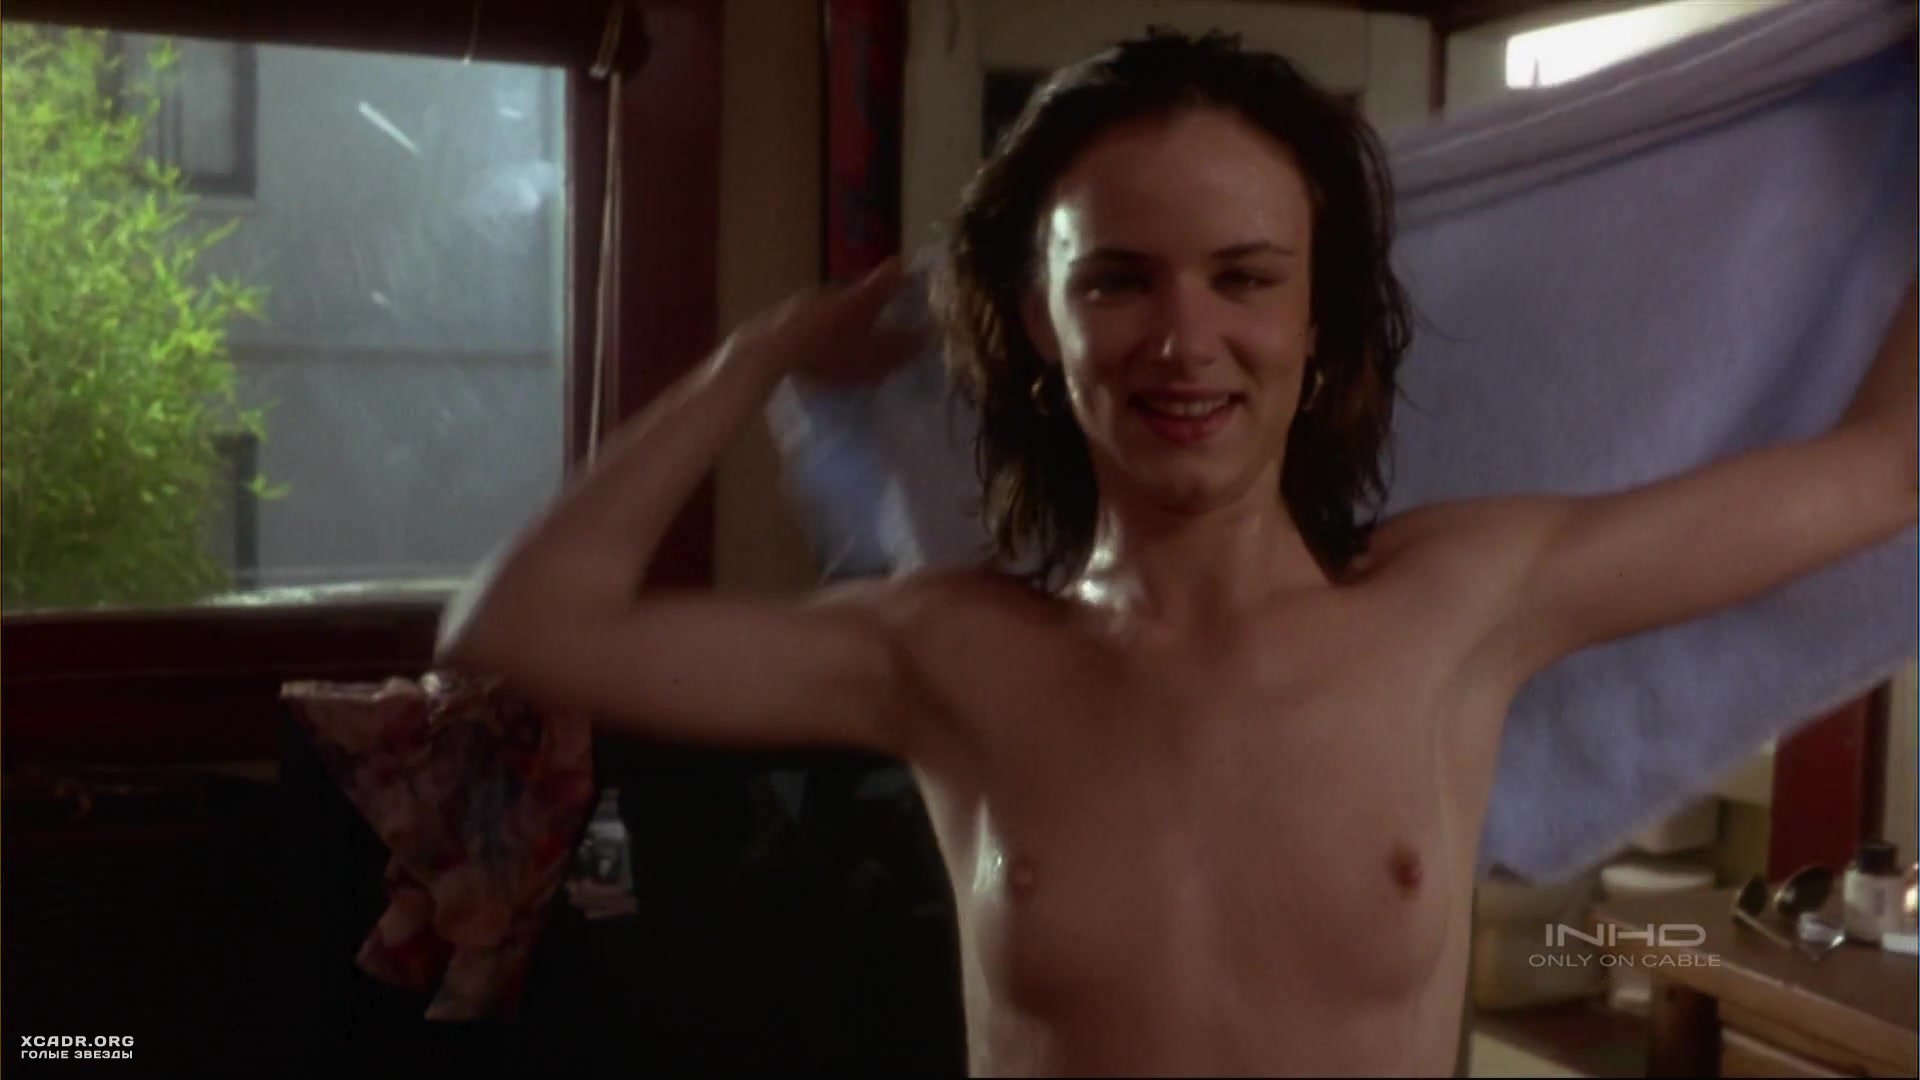 Nude pictures of juliette lewis